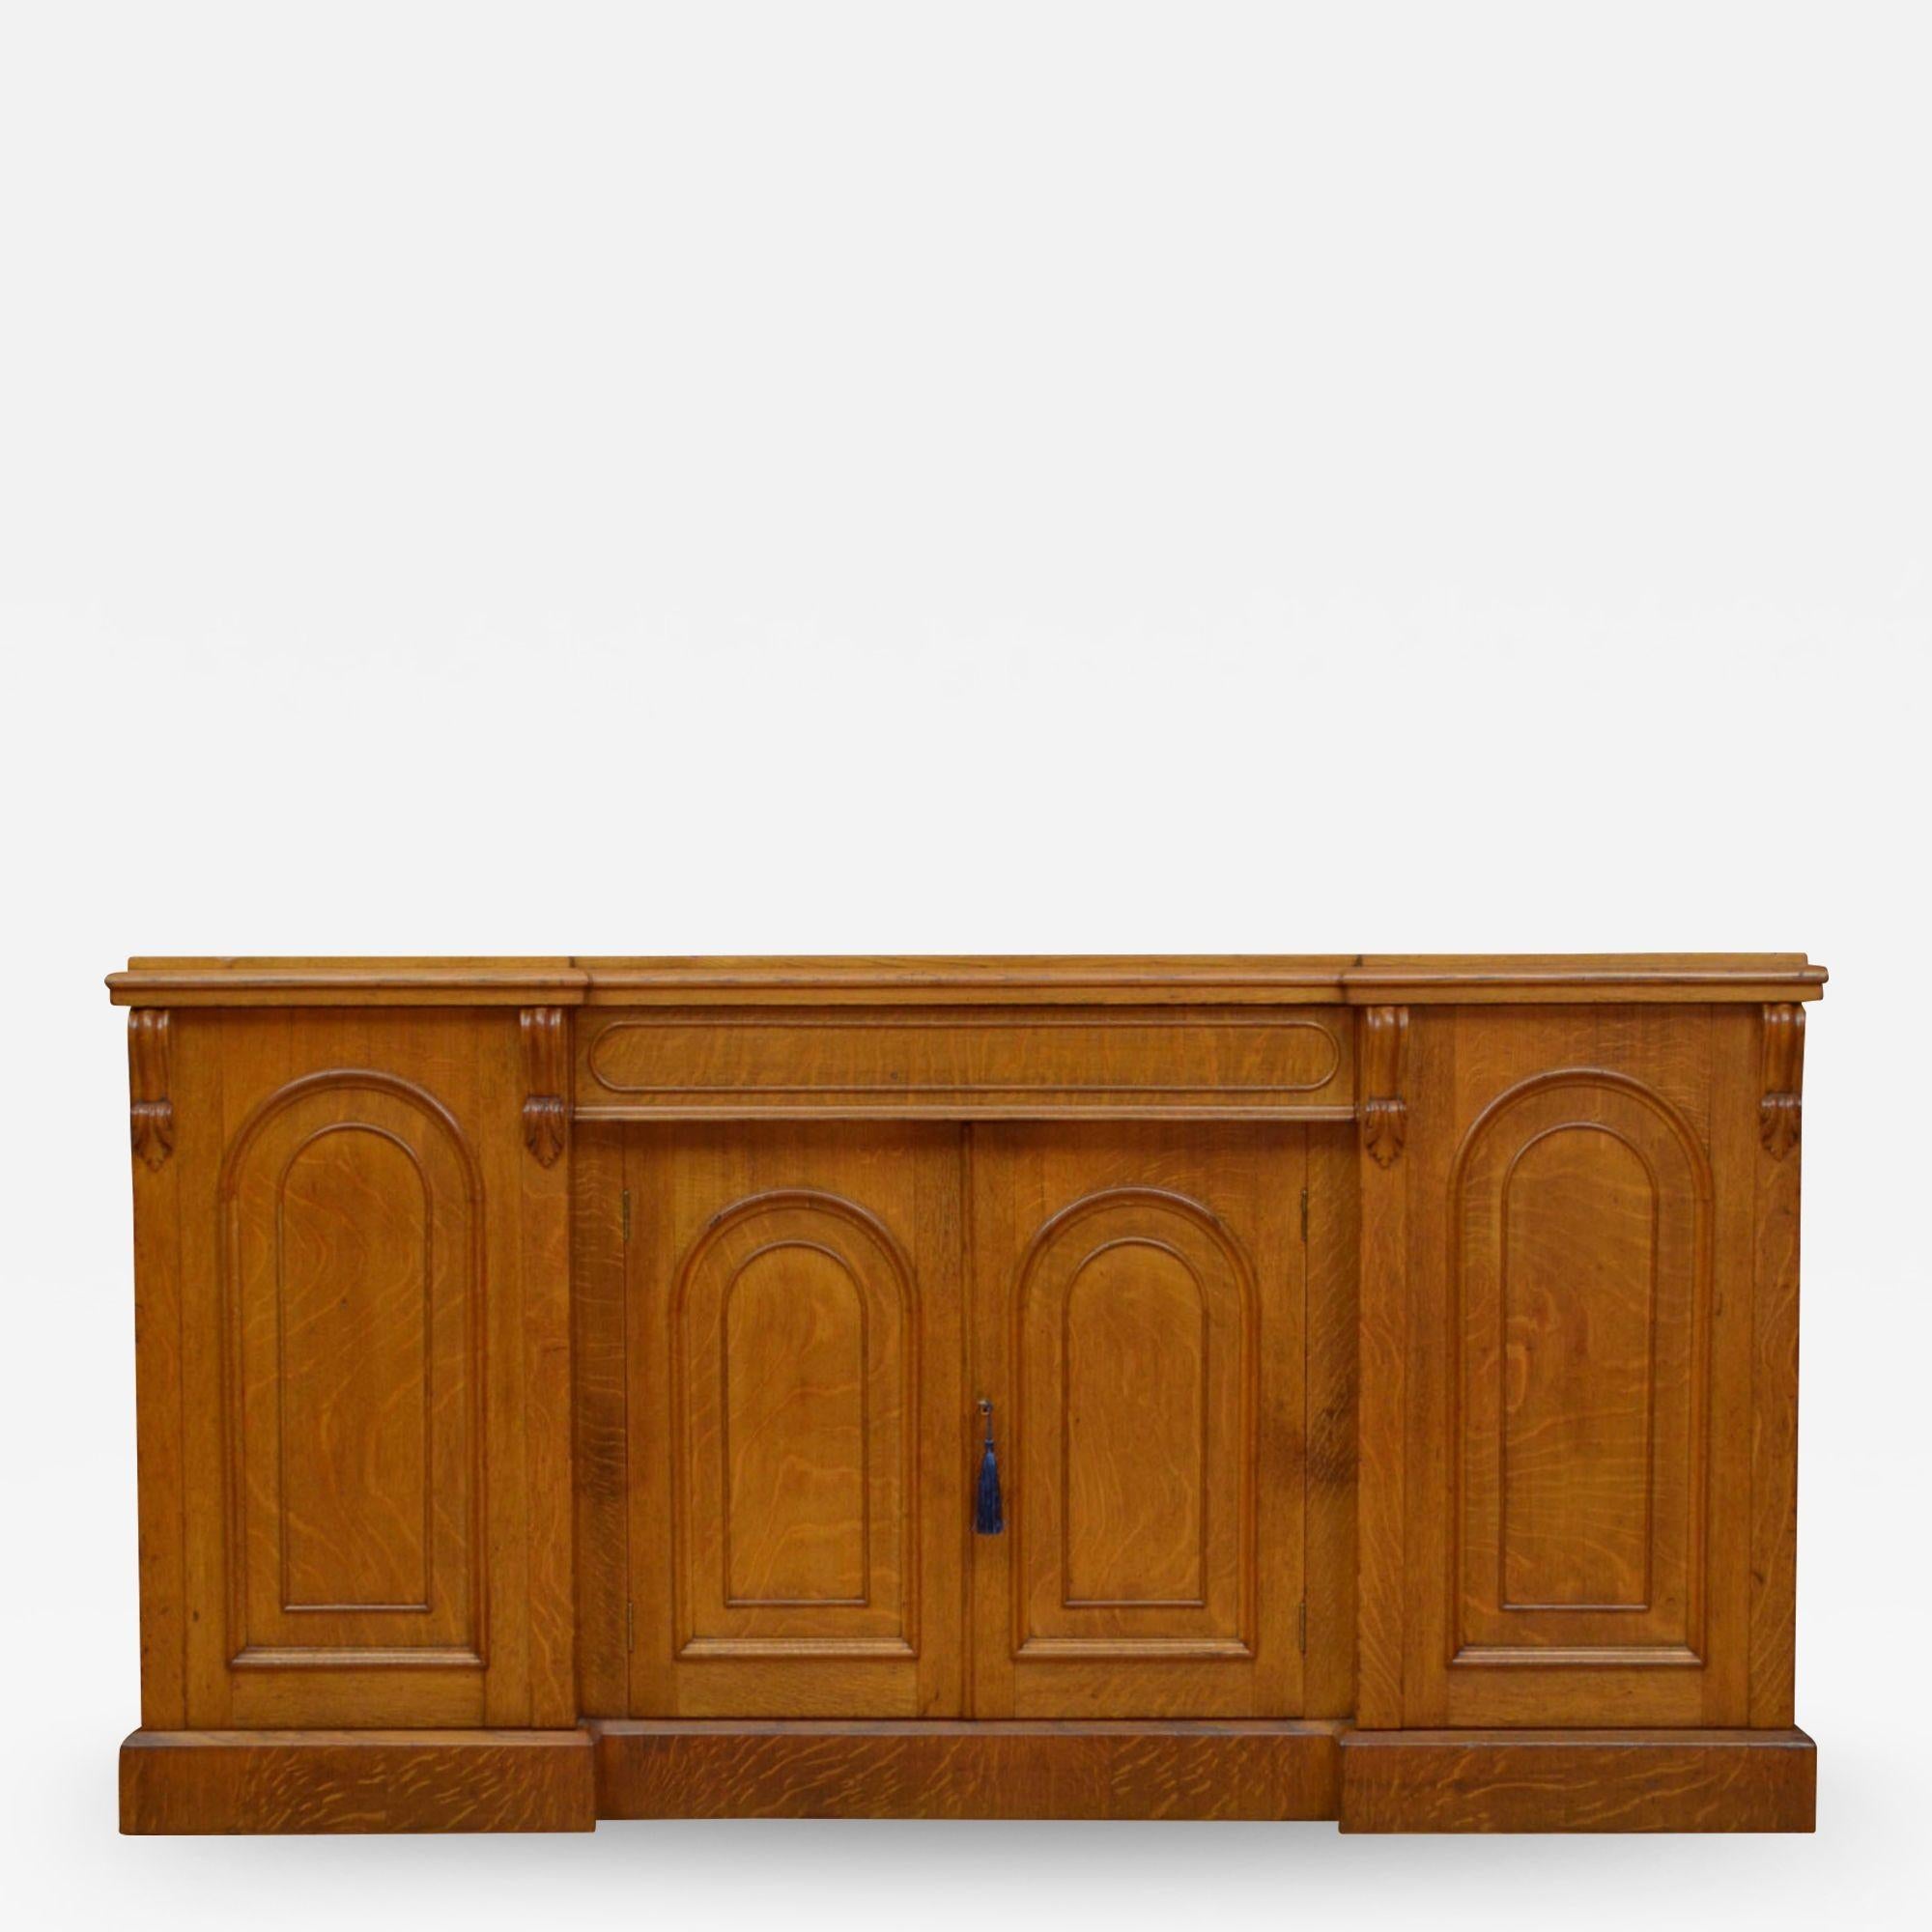 Sn5015 Rare Victorian inverted break front sideboard in oak, having attractive top with moulded edge above central drawer and a pair of arched and panelled cupboard door fitted with working lock and a key and enclosing a shelf, all flanked by